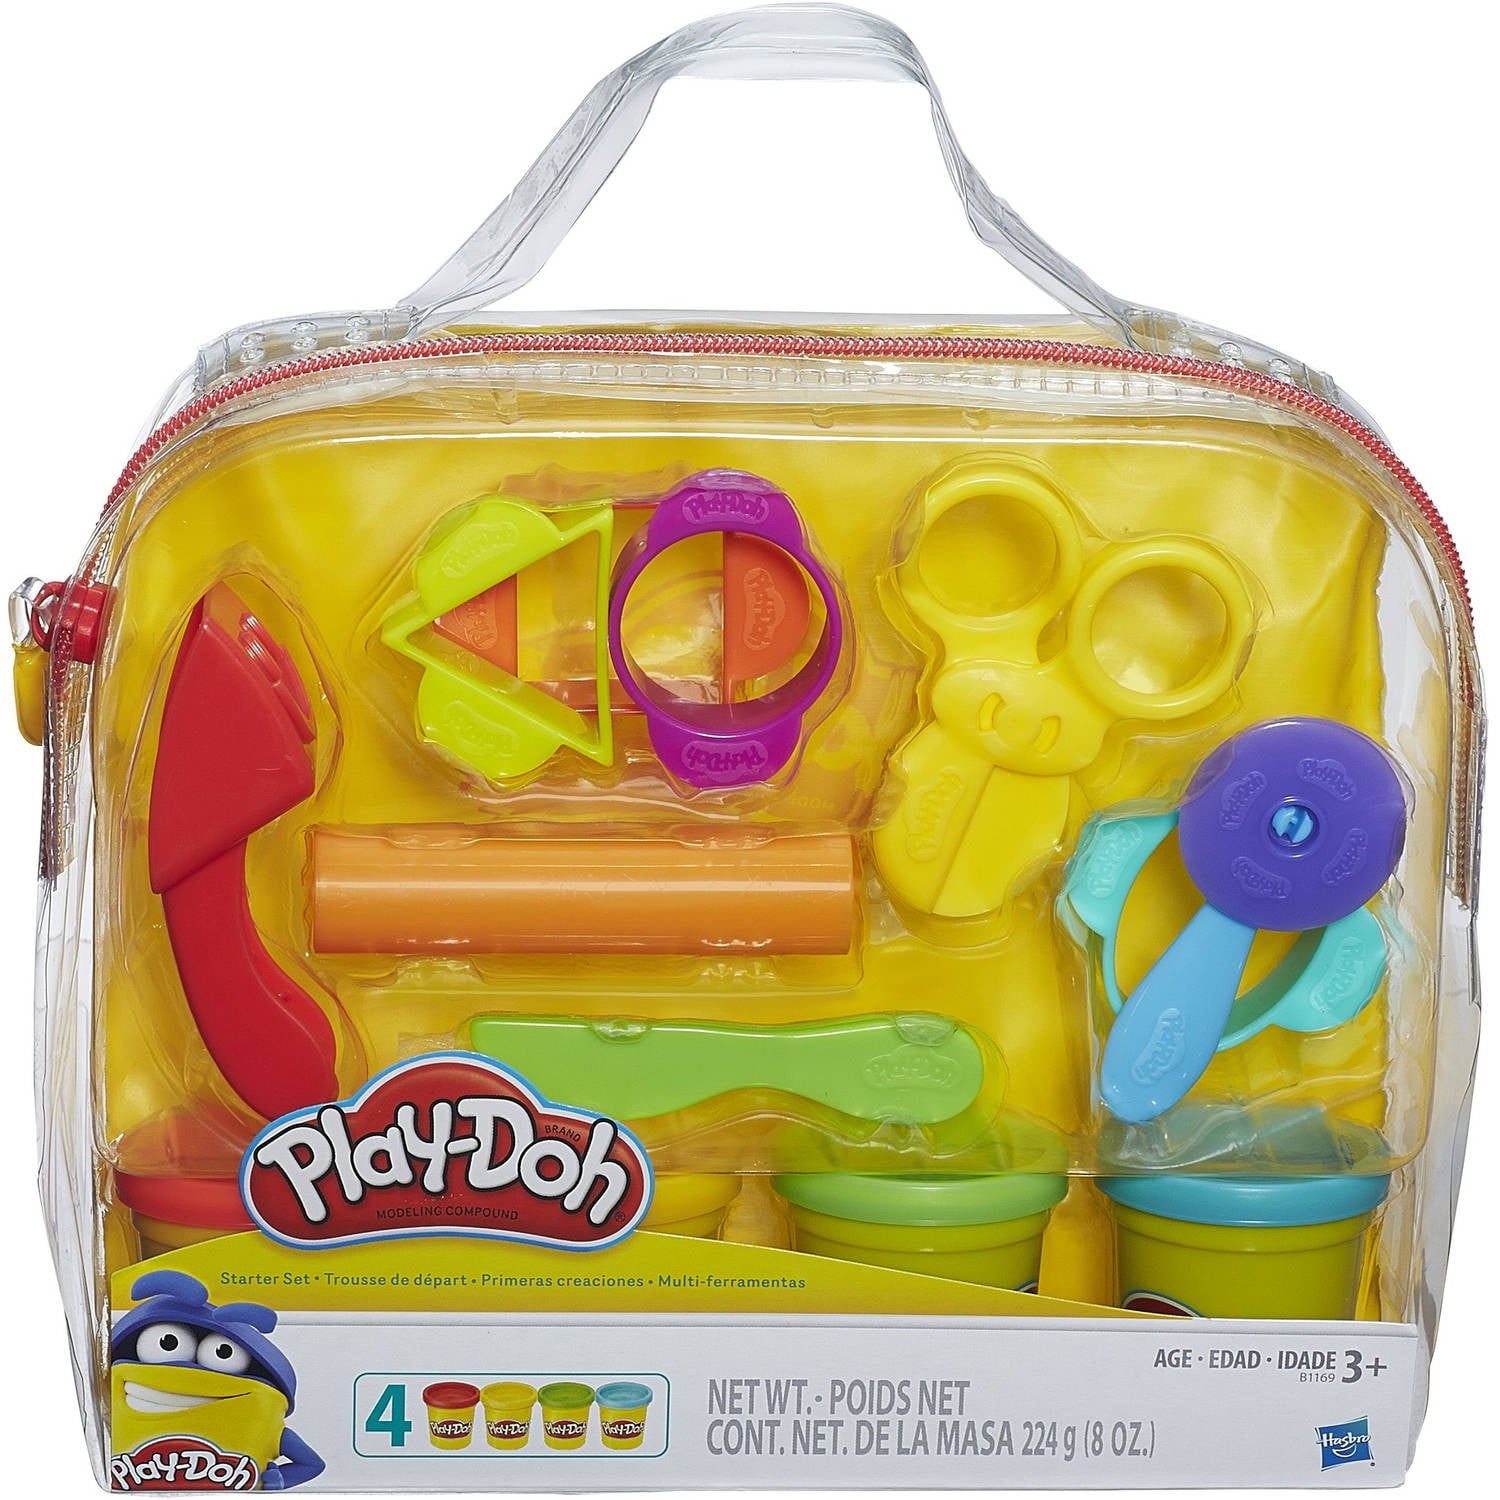 Play-Doh Start Set - Multicolor (13 Count), Great Easter Basket Stuffers